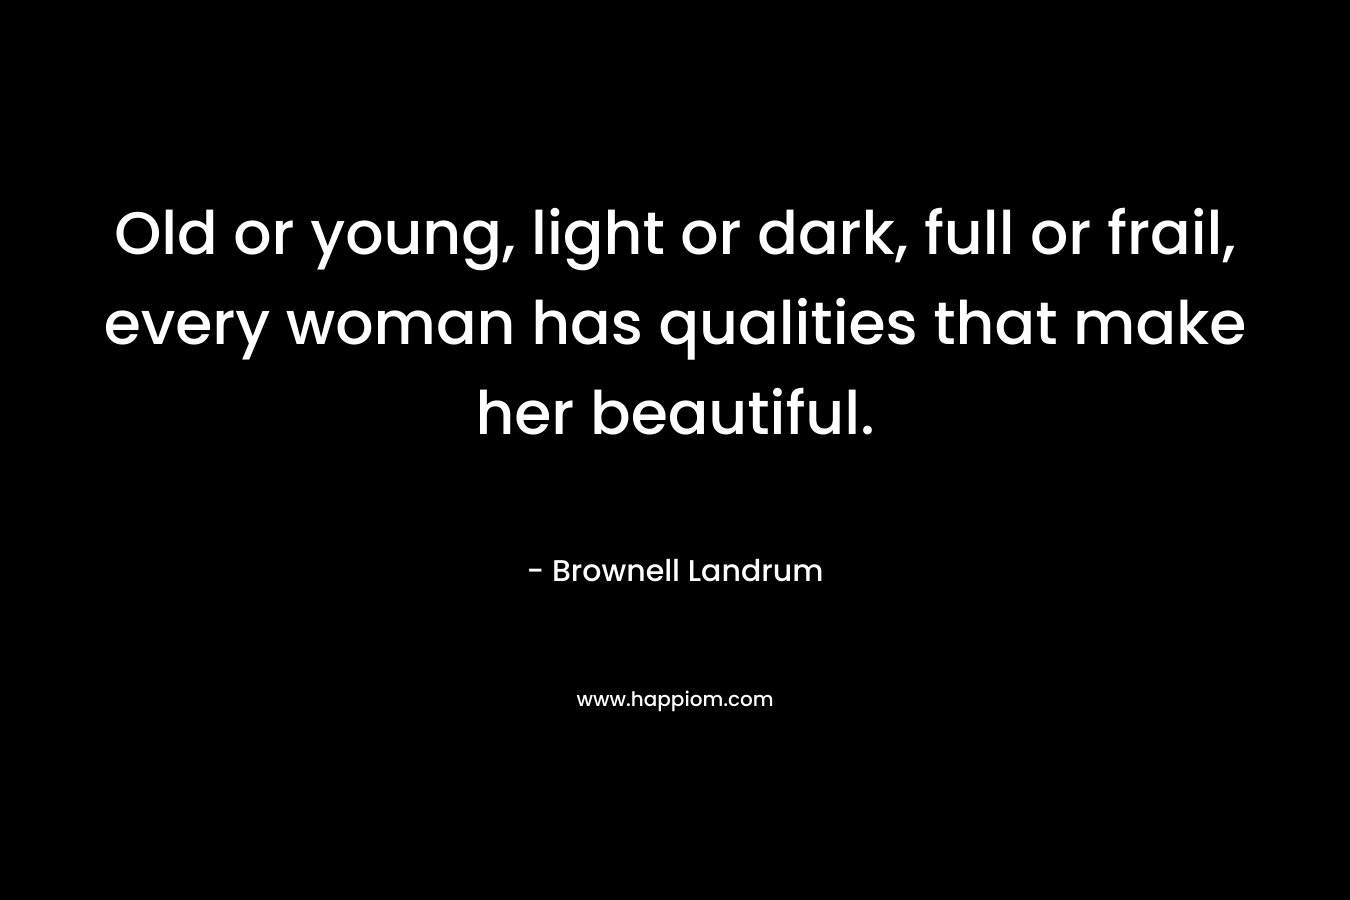 Old or young, light or dark, full or frail, every woman has qualities that make her beautiful.